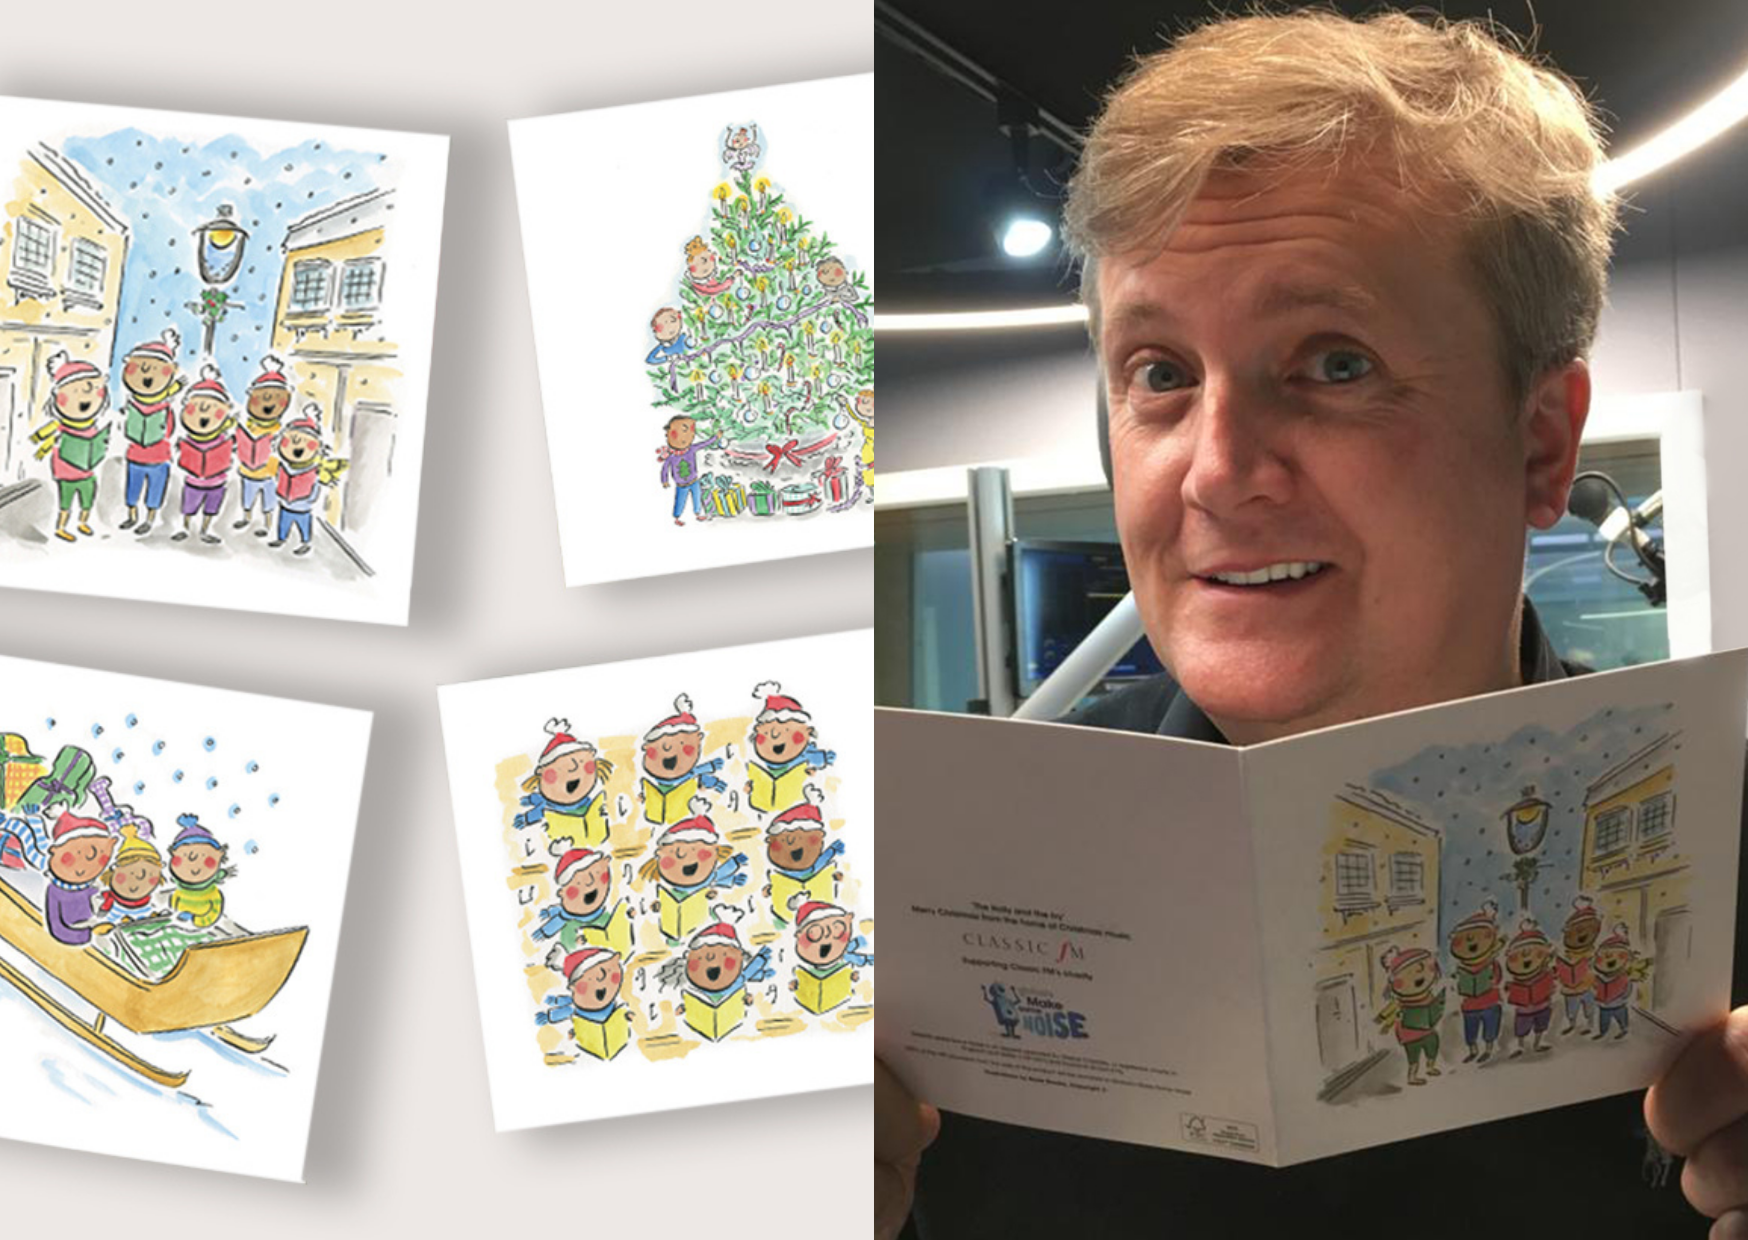 Purchase your Classic FM Christmas Cards